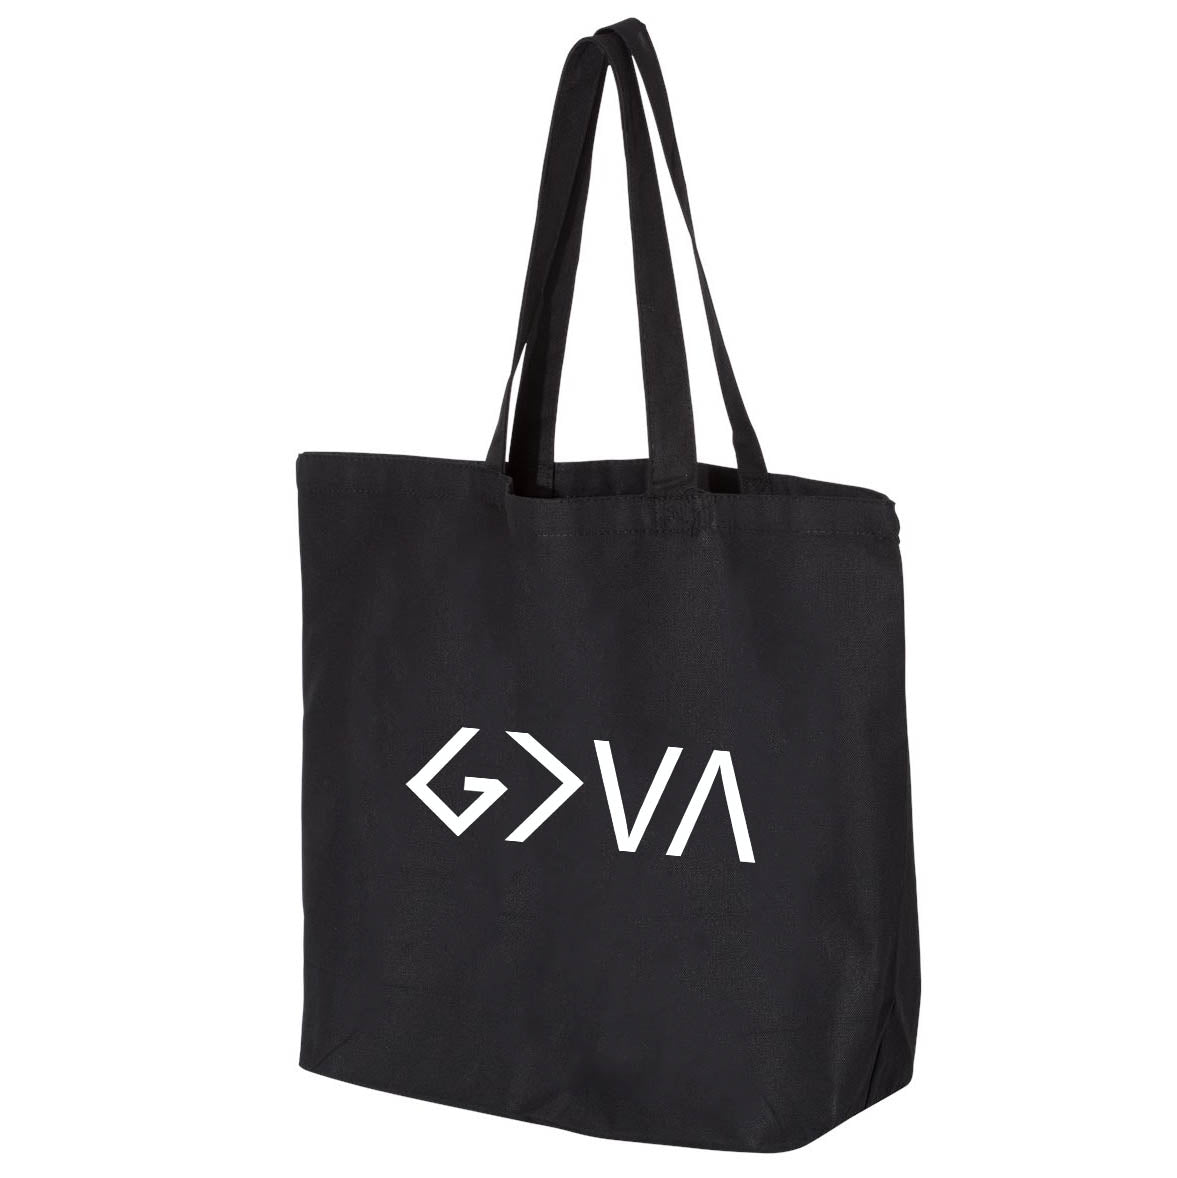 God Is Greater Than The Highs And Lows Jumbo Tote Canvas Bag